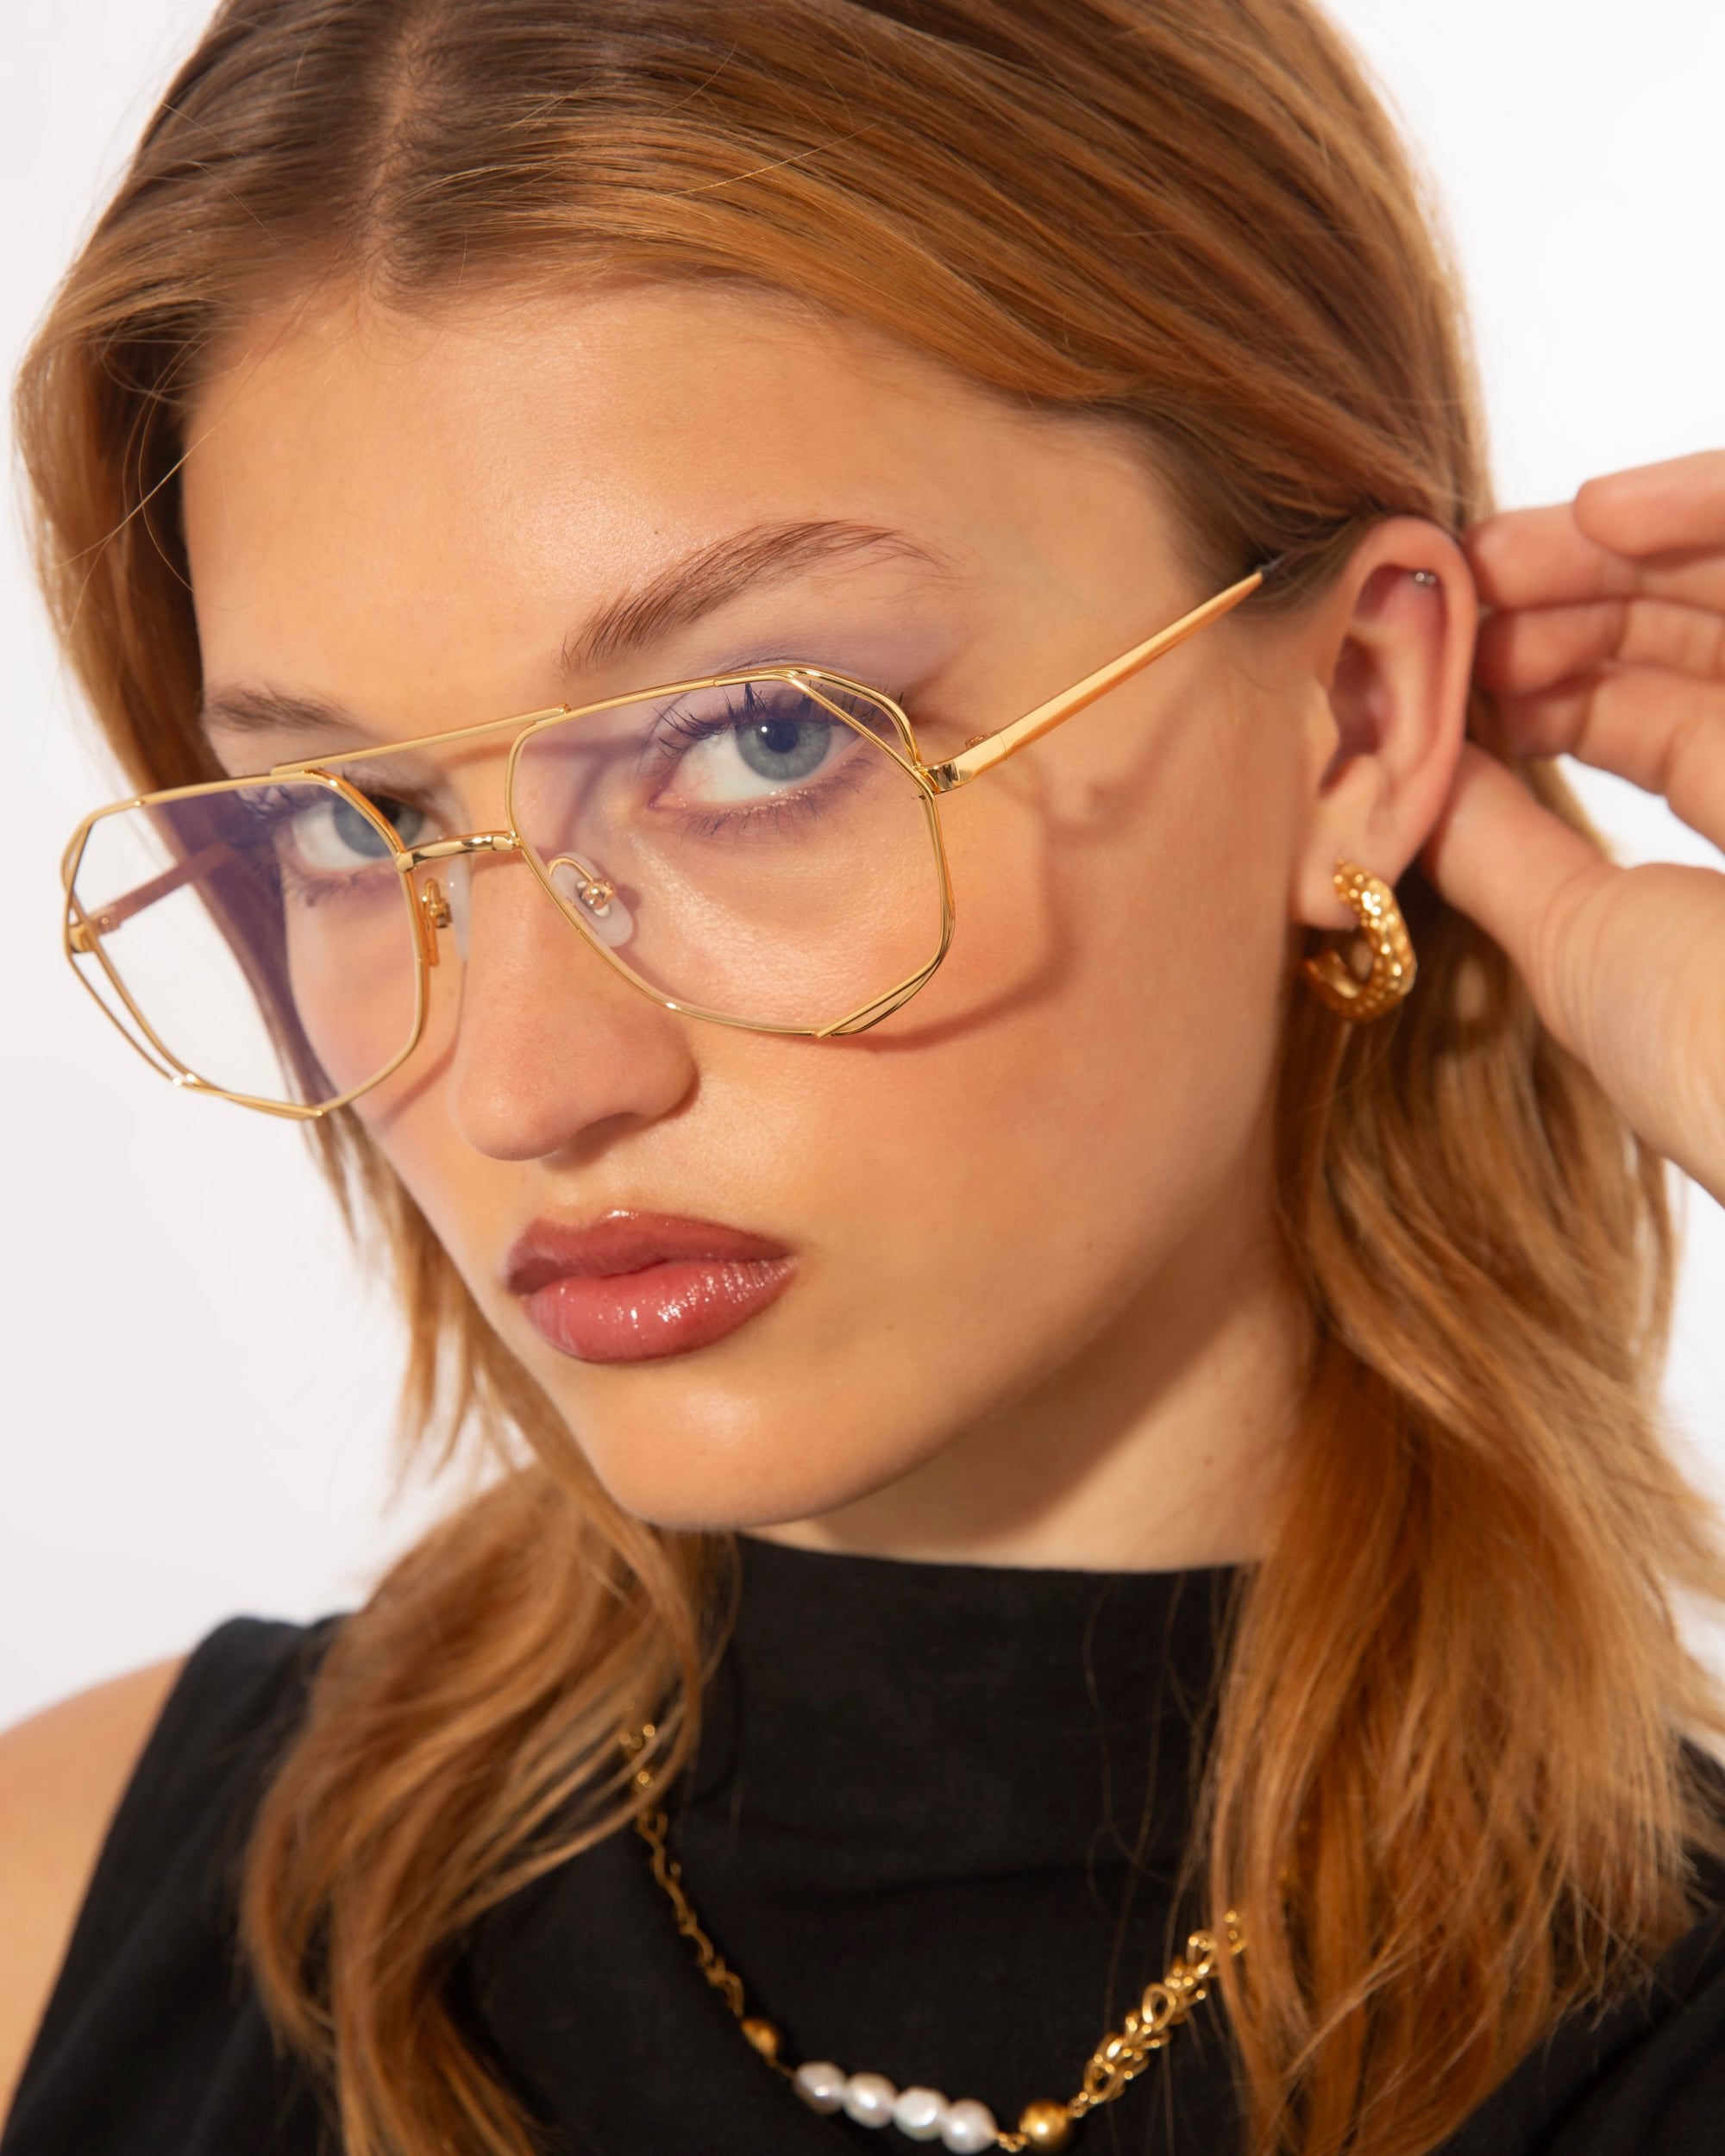 A woman with light brown hair wears oversized, gold-framed Genius Two glasses from For Art&#39;s Sake® with blue light filter lenses and gold hoop earrings. She is dressed in a black top with a necklace featuring pearls. Her hand is gently touching her ear, and she gazes directly at the camera. The background is plain white.